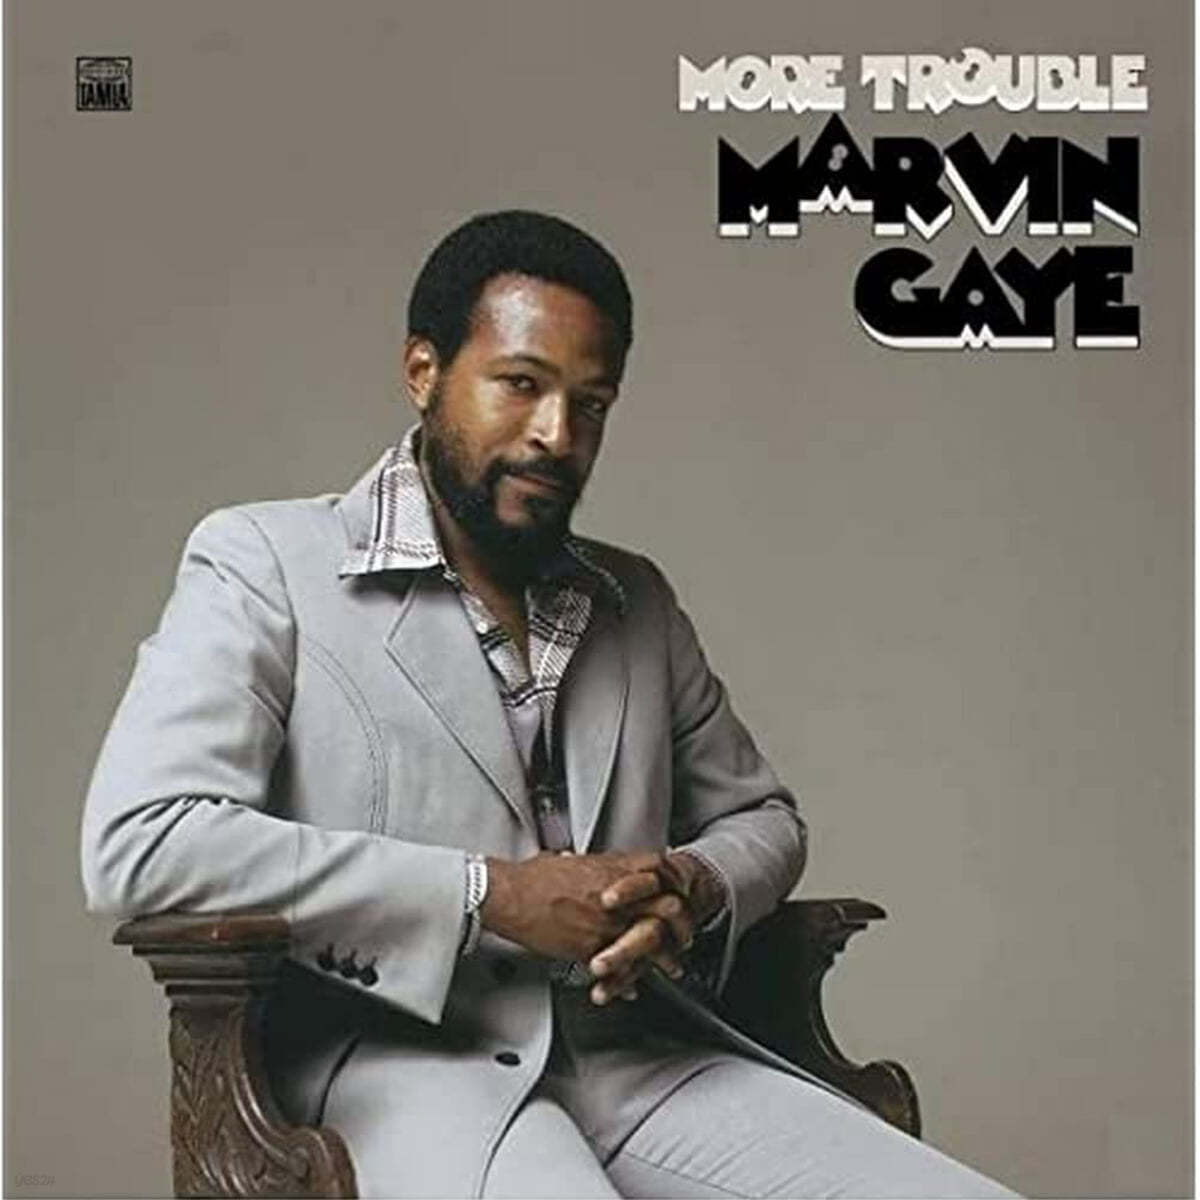 Marvin Gaye (마빈 게이) - More Trouble [LP]